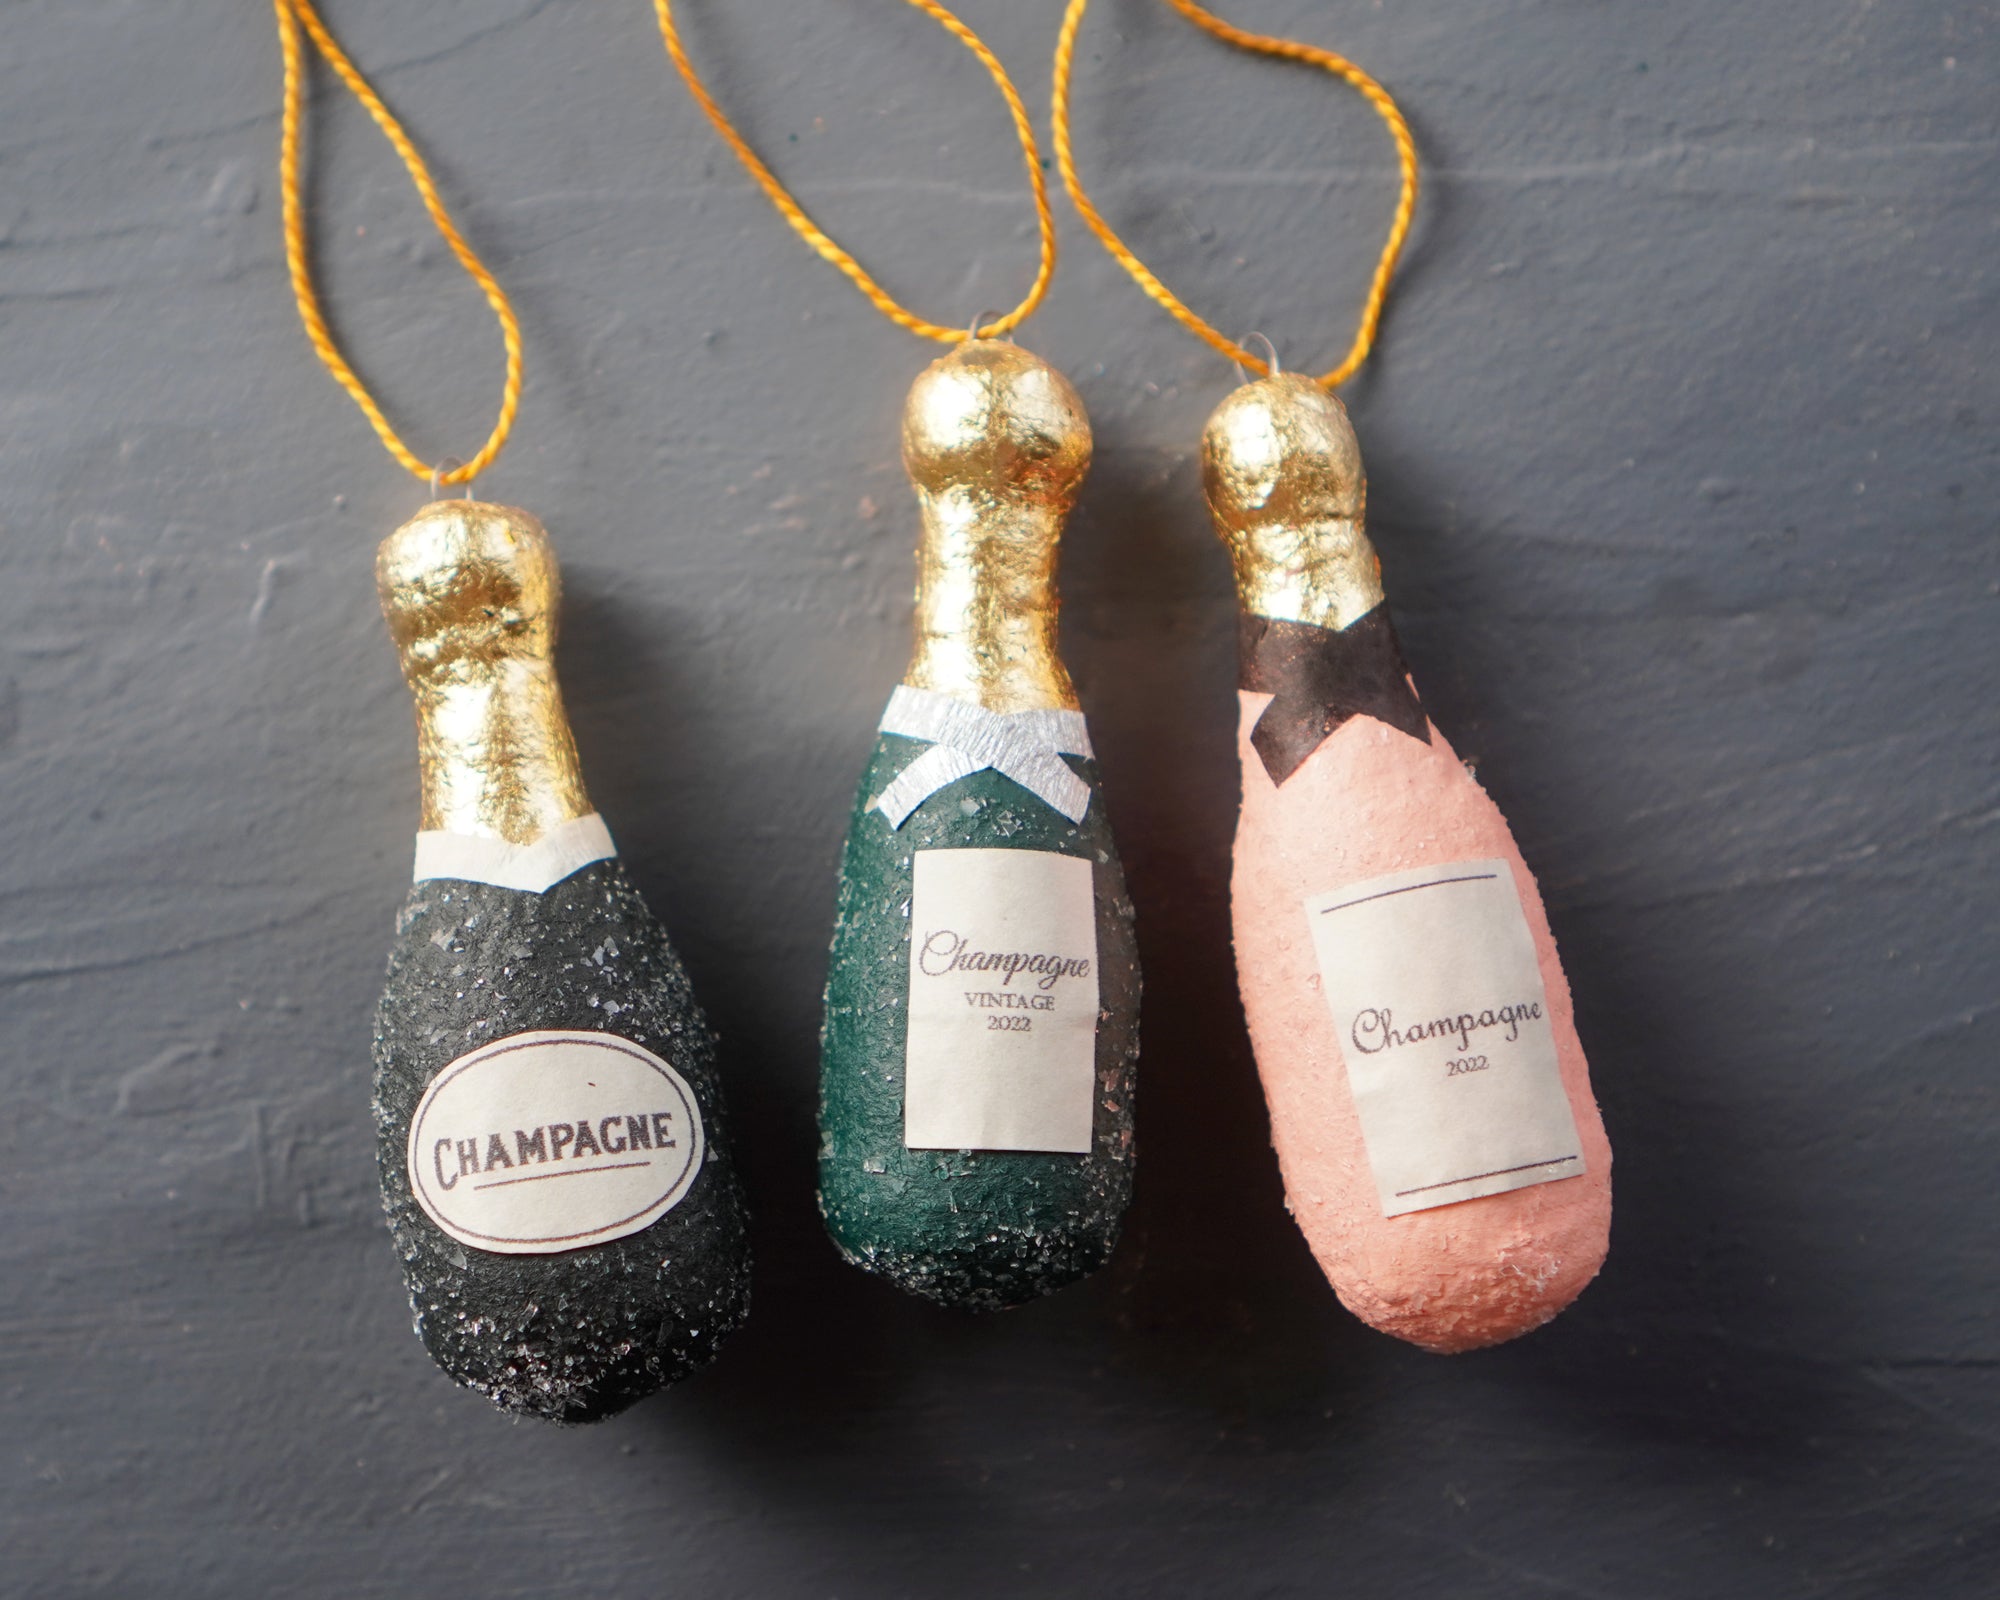 Spun Cotton How-To: Making Vintage Style Champagne Bottle Ornaments